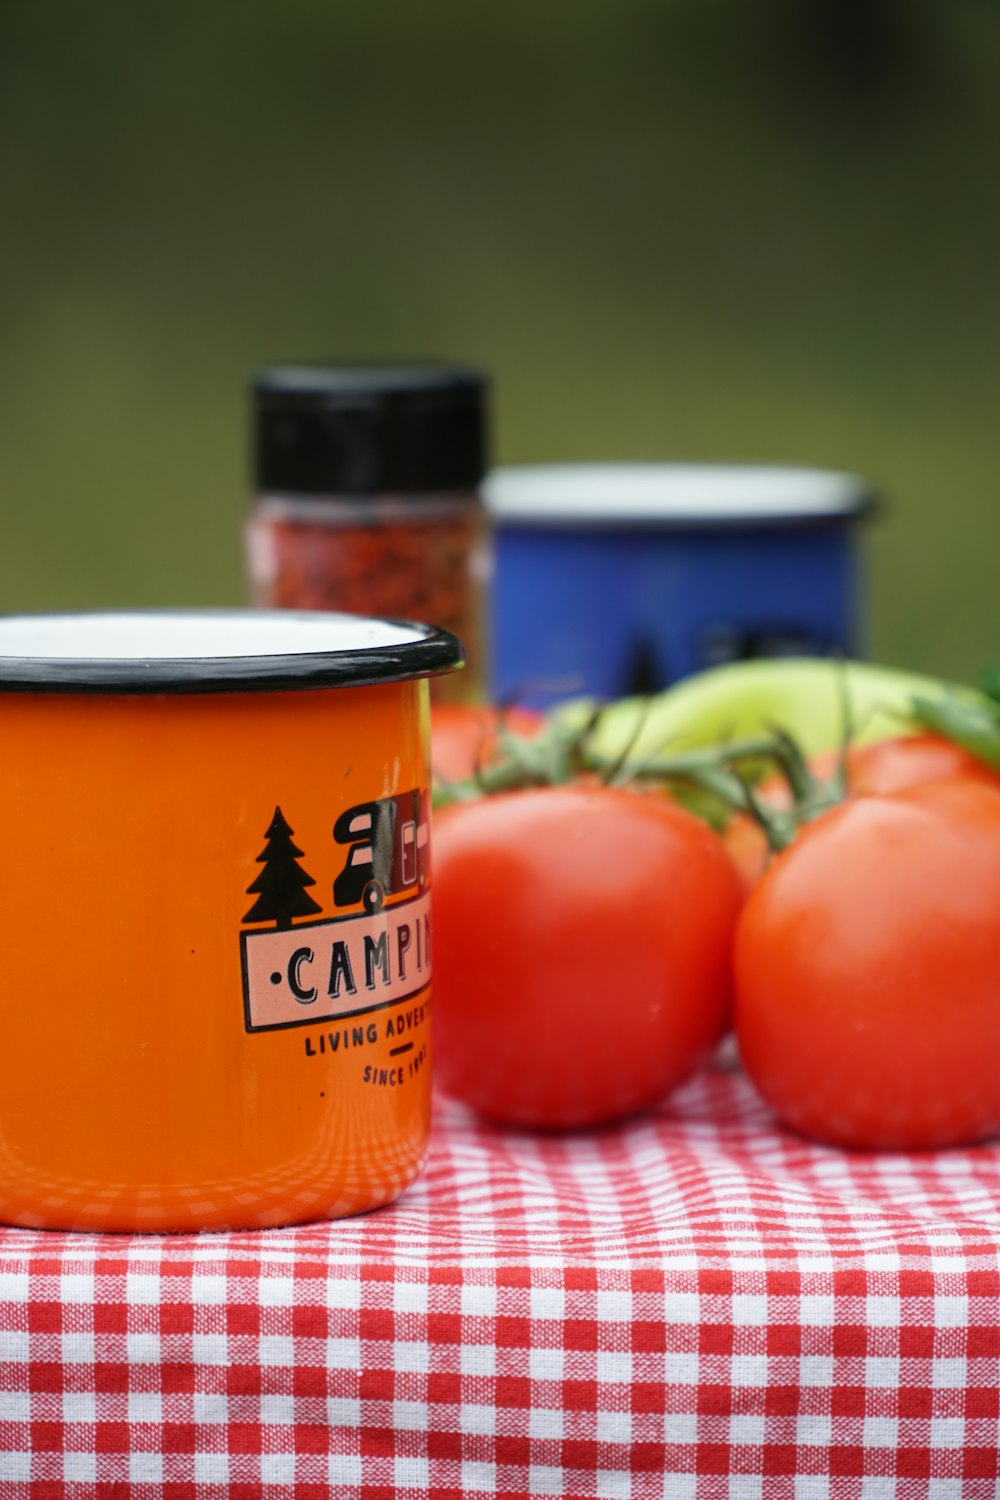 tomatoes, tomatoes, and a can of canned food on a table